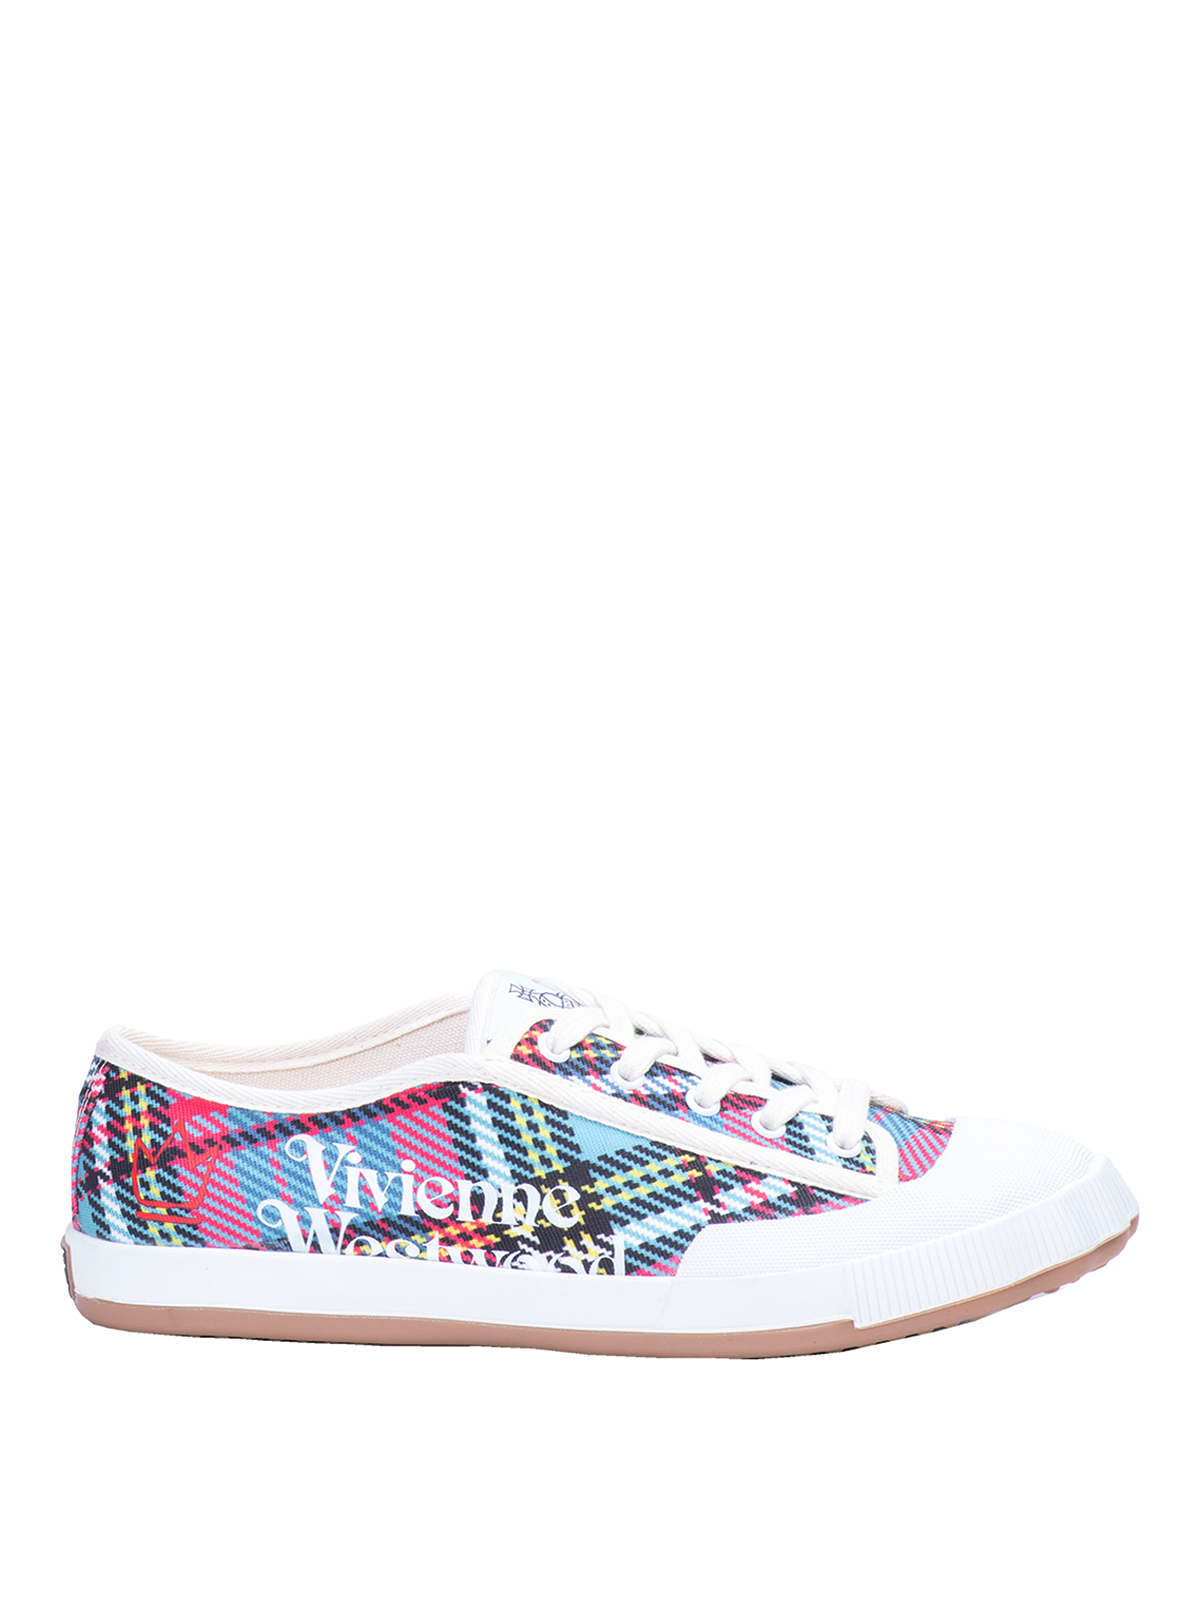 Vivienne Westwood Animal Gym Shoes In Multicolor